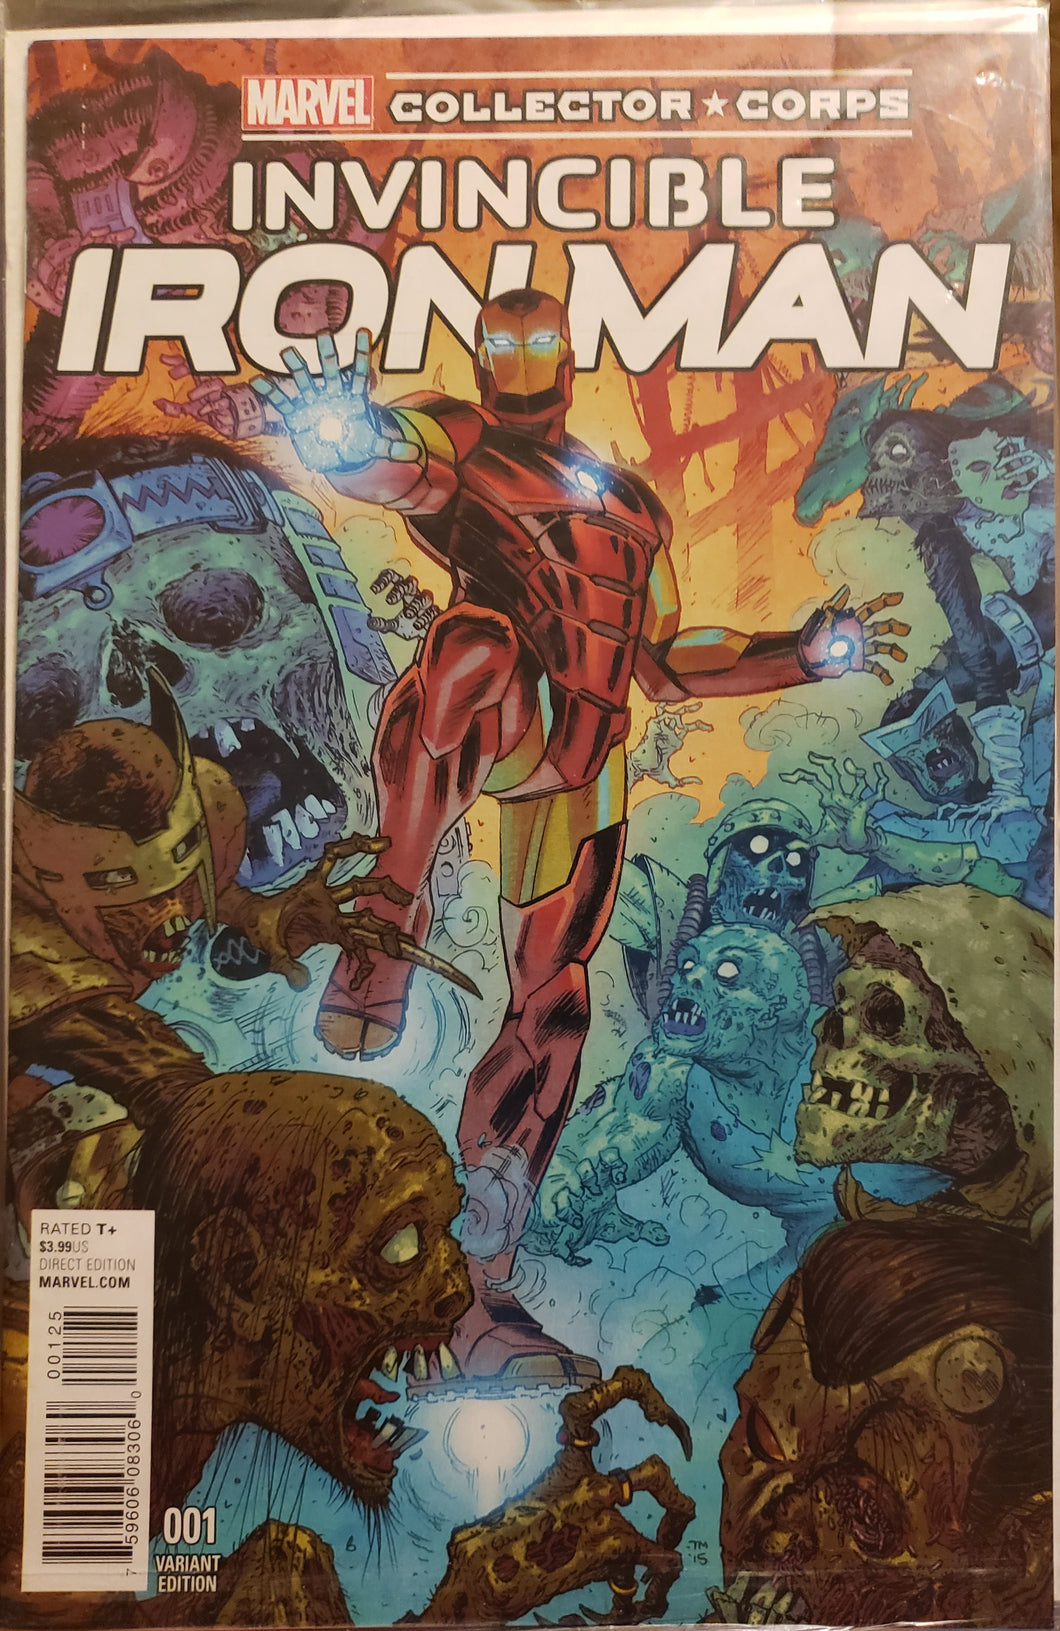 INVINCIBLE IRON MAN #001. MARVEL Collector Corps/Funko Exclusive Variant F/VF-NM